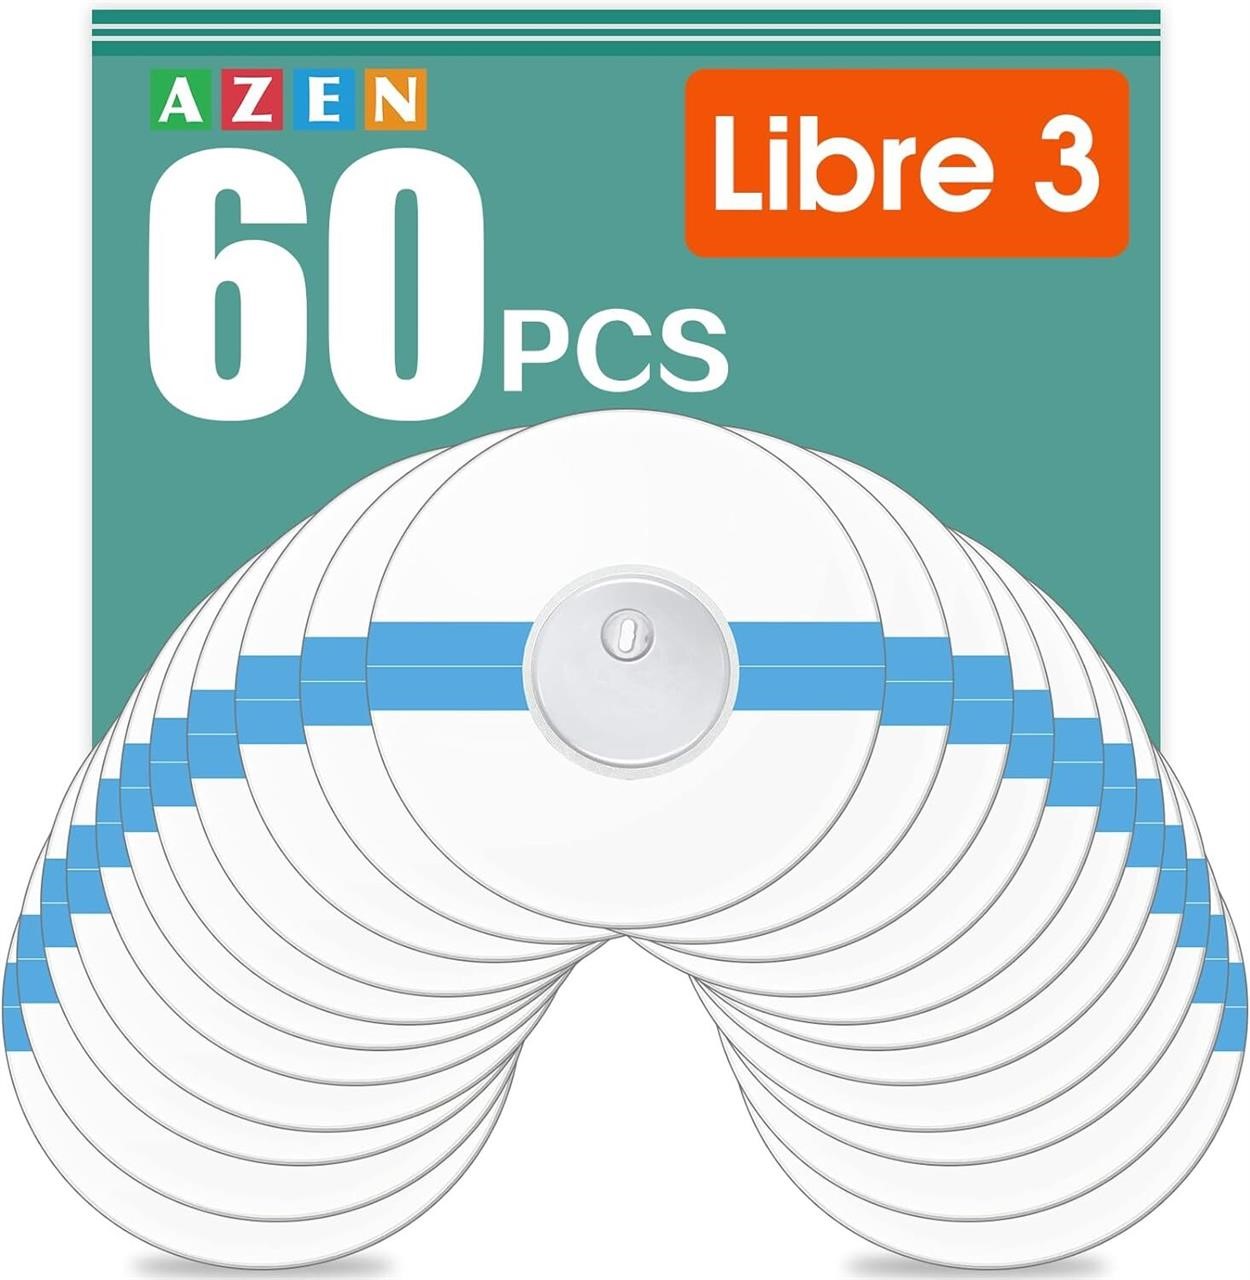 AZEN 60 Pack Freestyle Sensor Covers for Libre 3